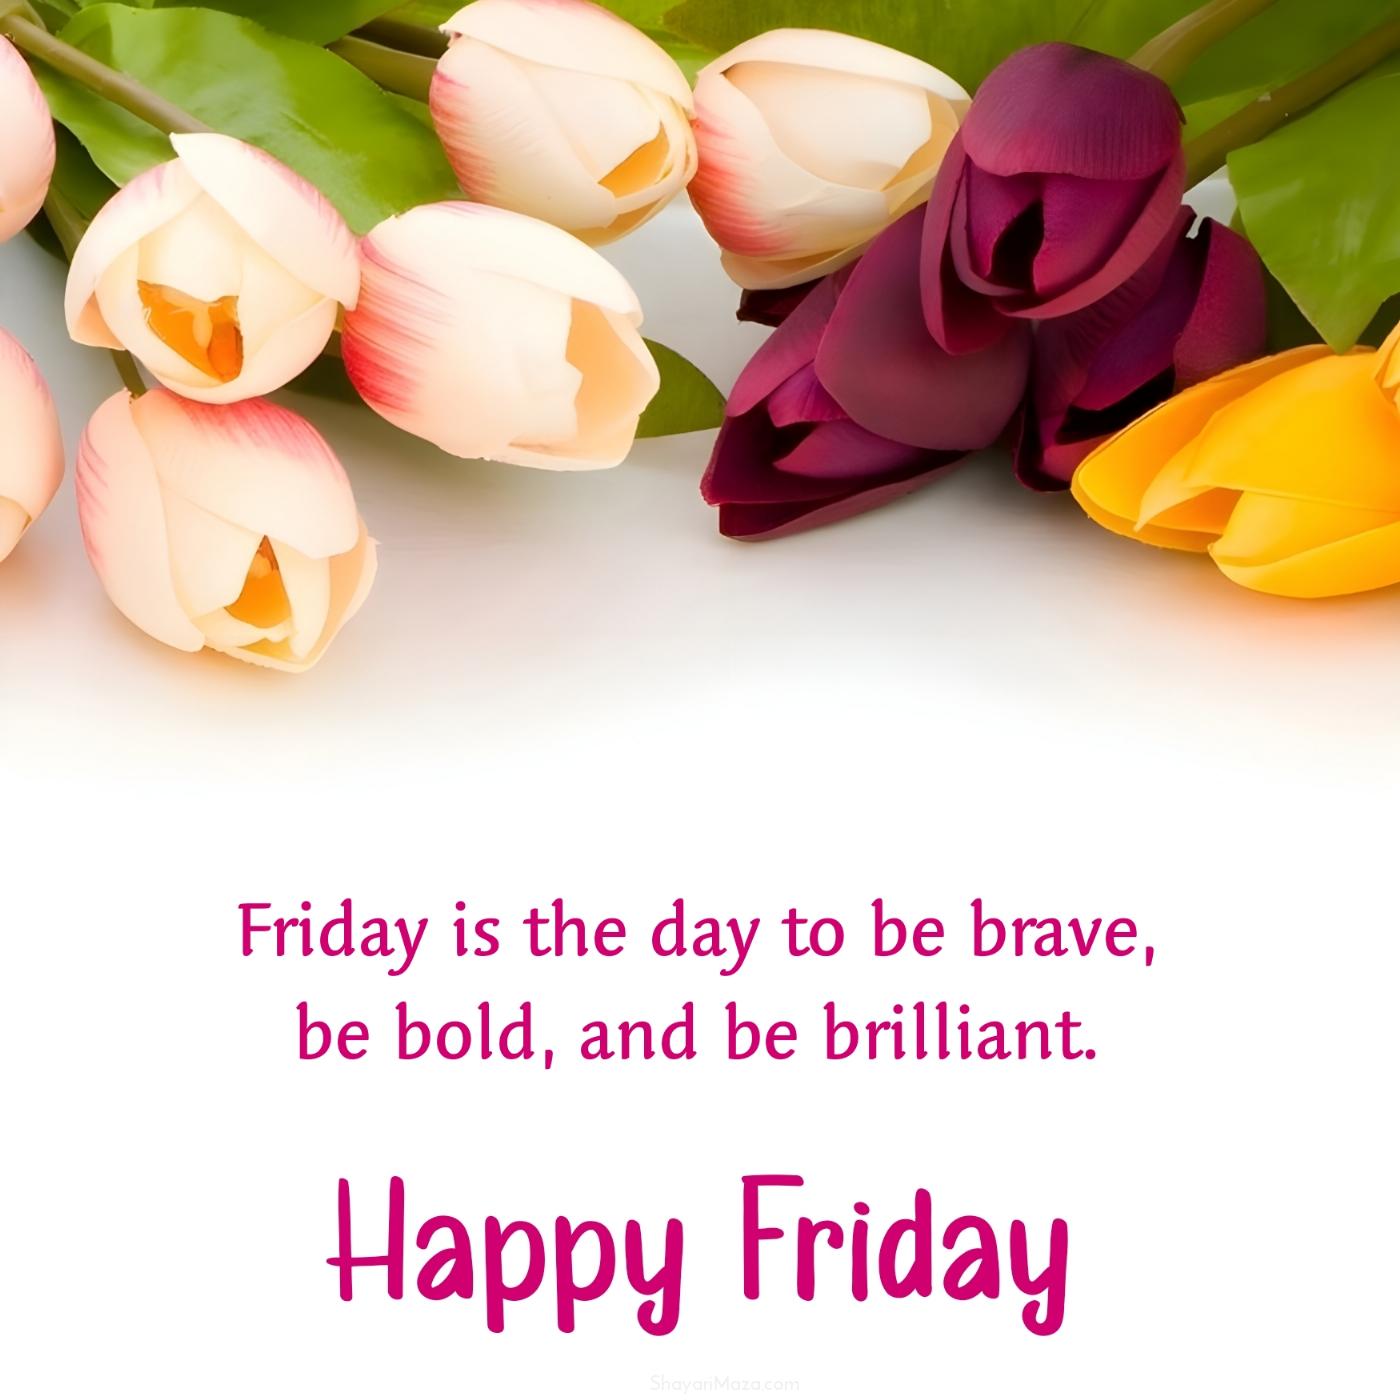 Friday is the day to be brave be bold and be brilliant